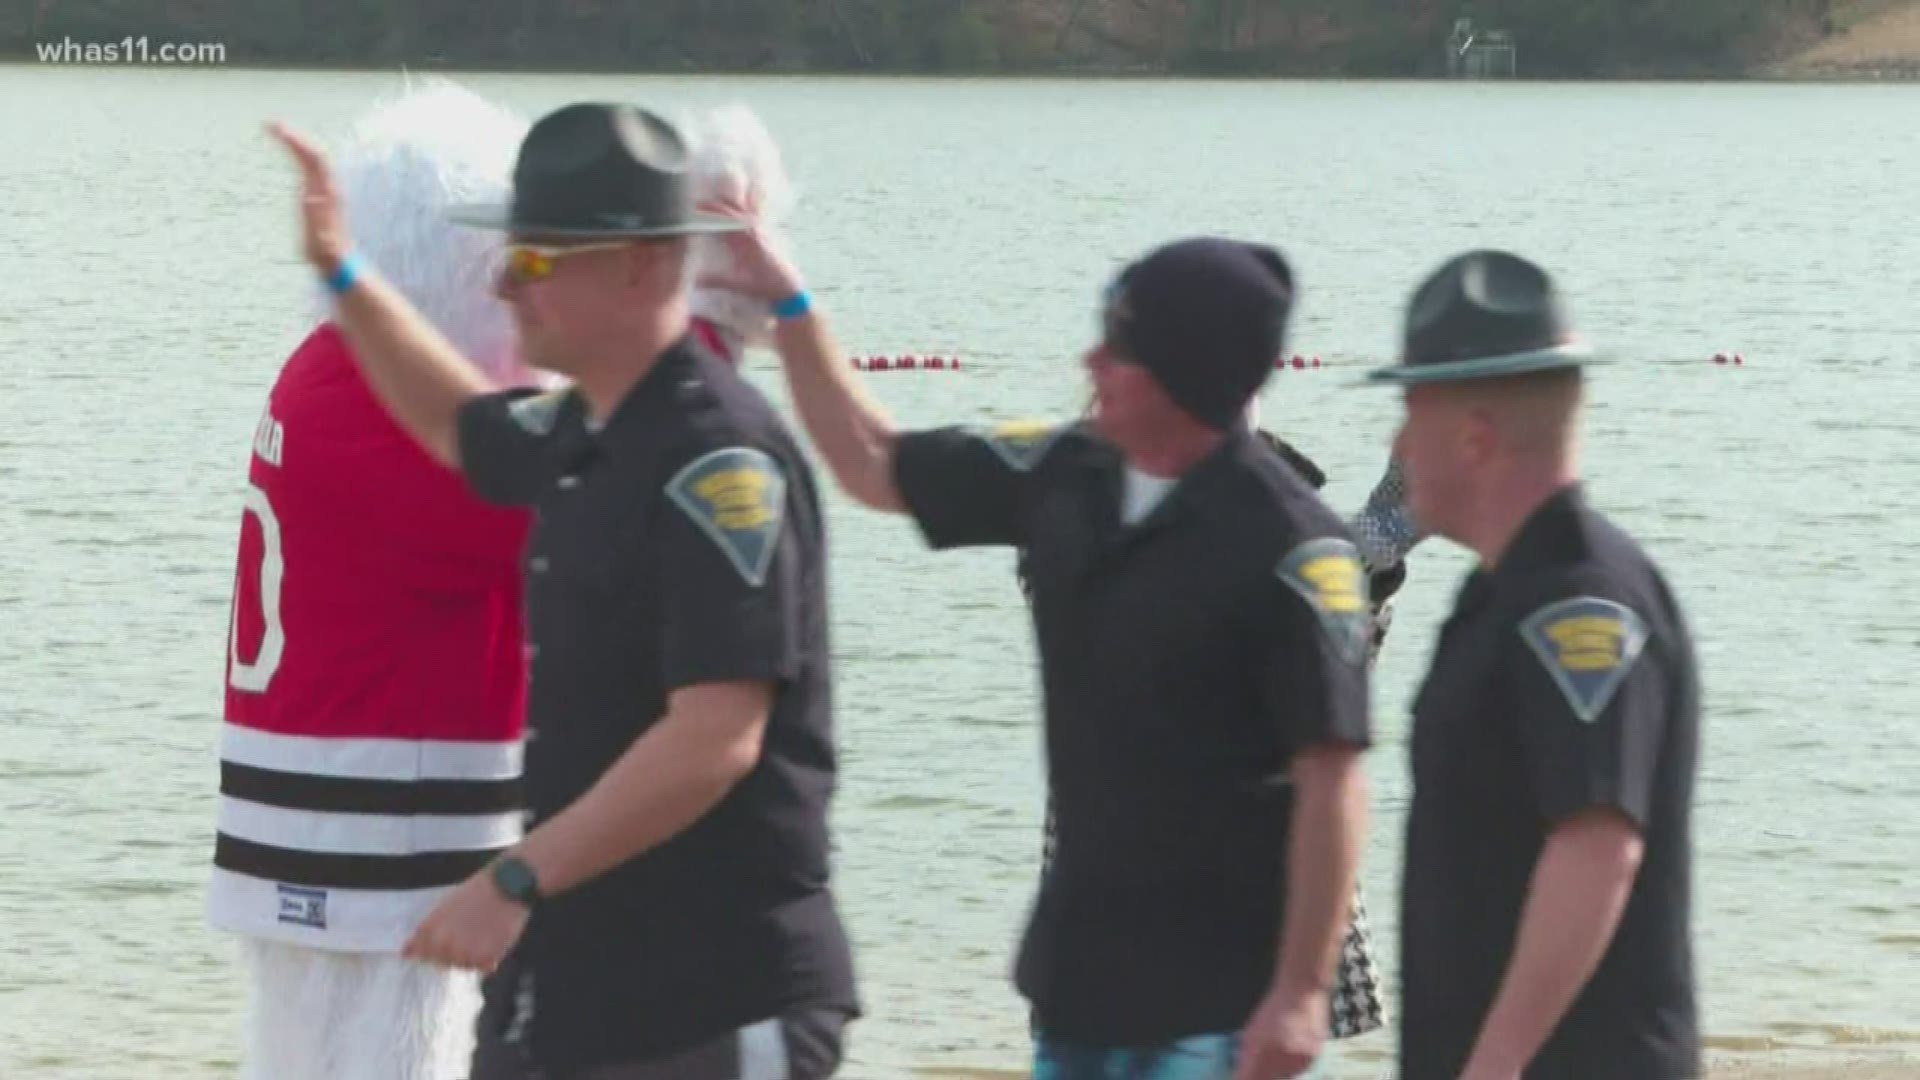 Three-hundred brave souls took the plunge in frigid waters to benefit Special Olympics Indiana.